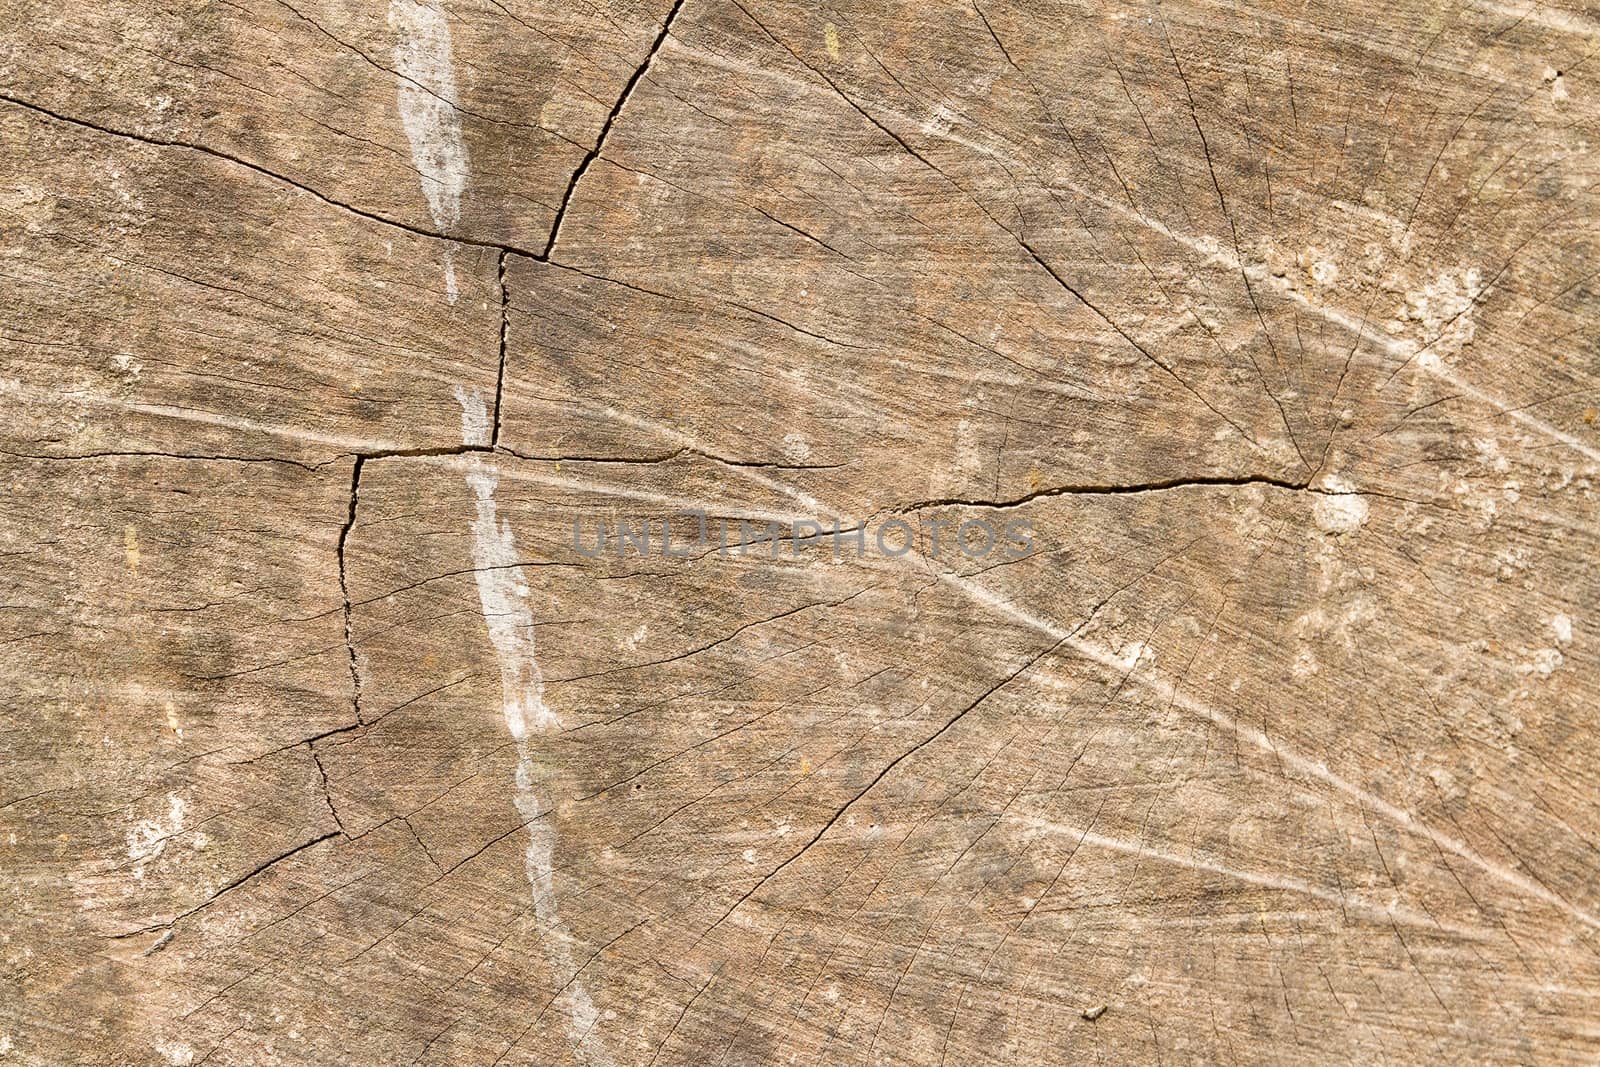 Dry wood texture of cut stump with scratches on surface